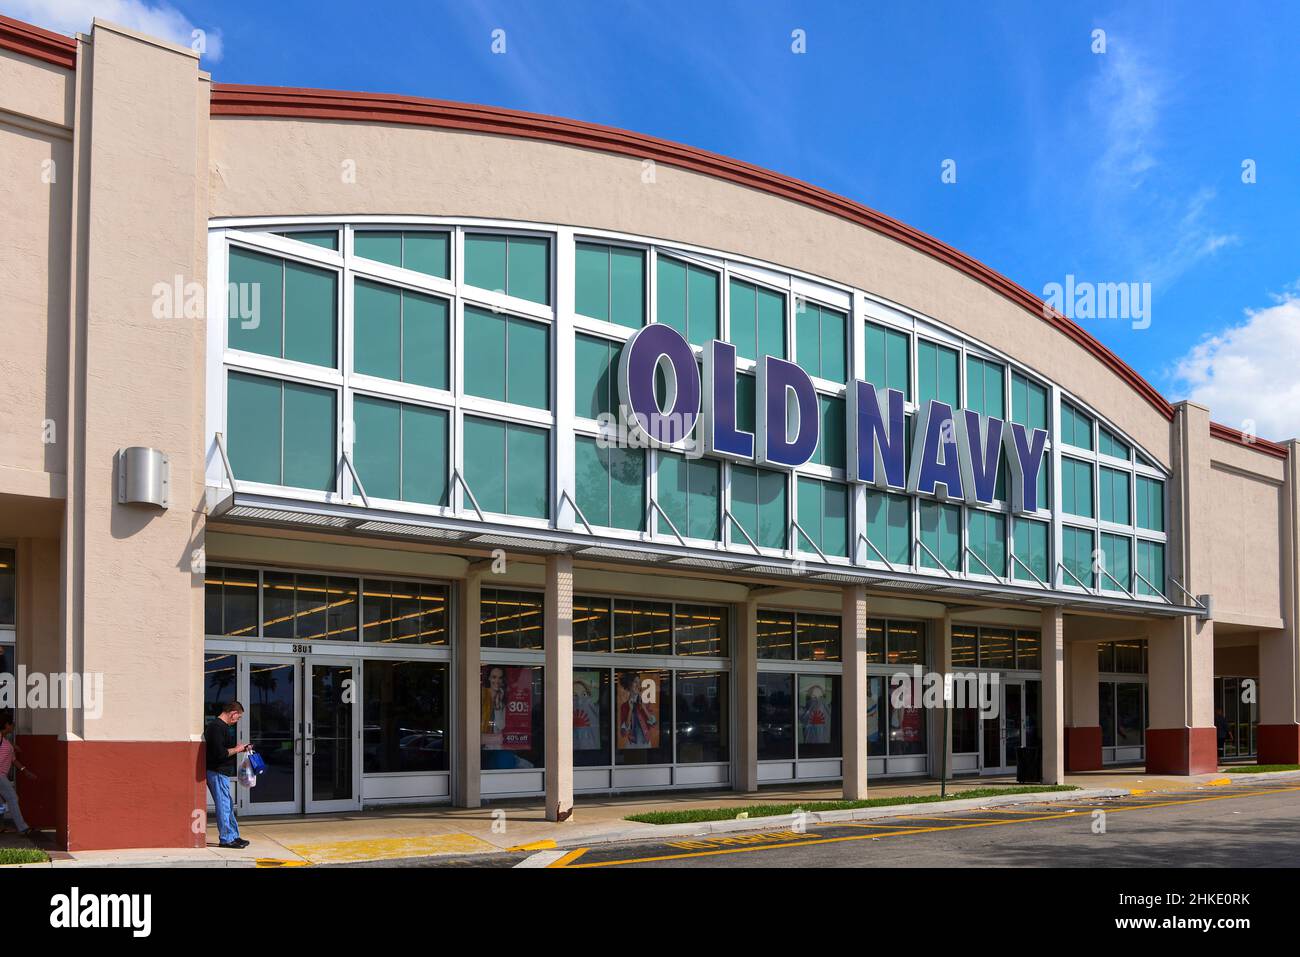 Hollywood, FL, USA - March 5, 2017:  Old Navy is an American clothing and accessories retailing company owned by Gap Inc with stores in several nation Stock Photo